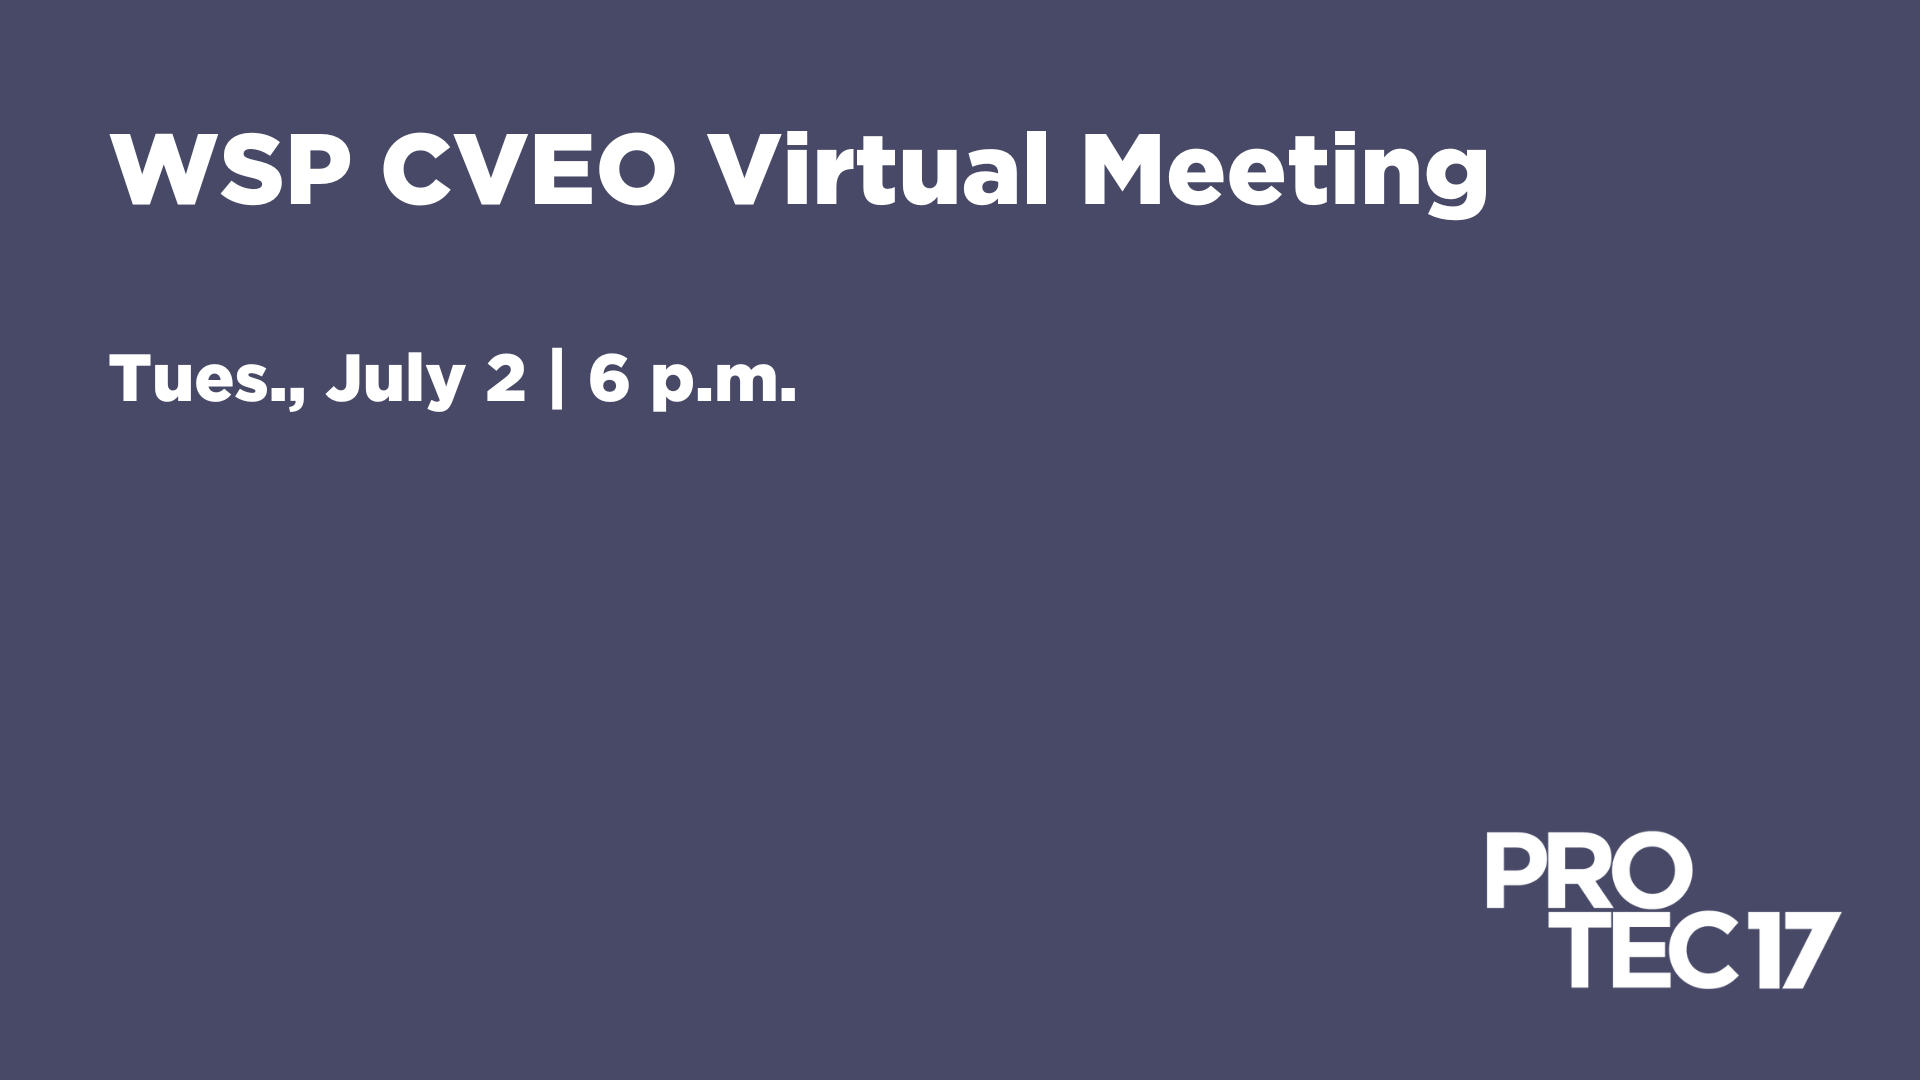 On a blue background the title text reads, "WSP CVEO Virtual Meeting" followed by the subtext, "Tues., July 12 | 6 p.m." The PROTEC17 logo is in the bottom right.